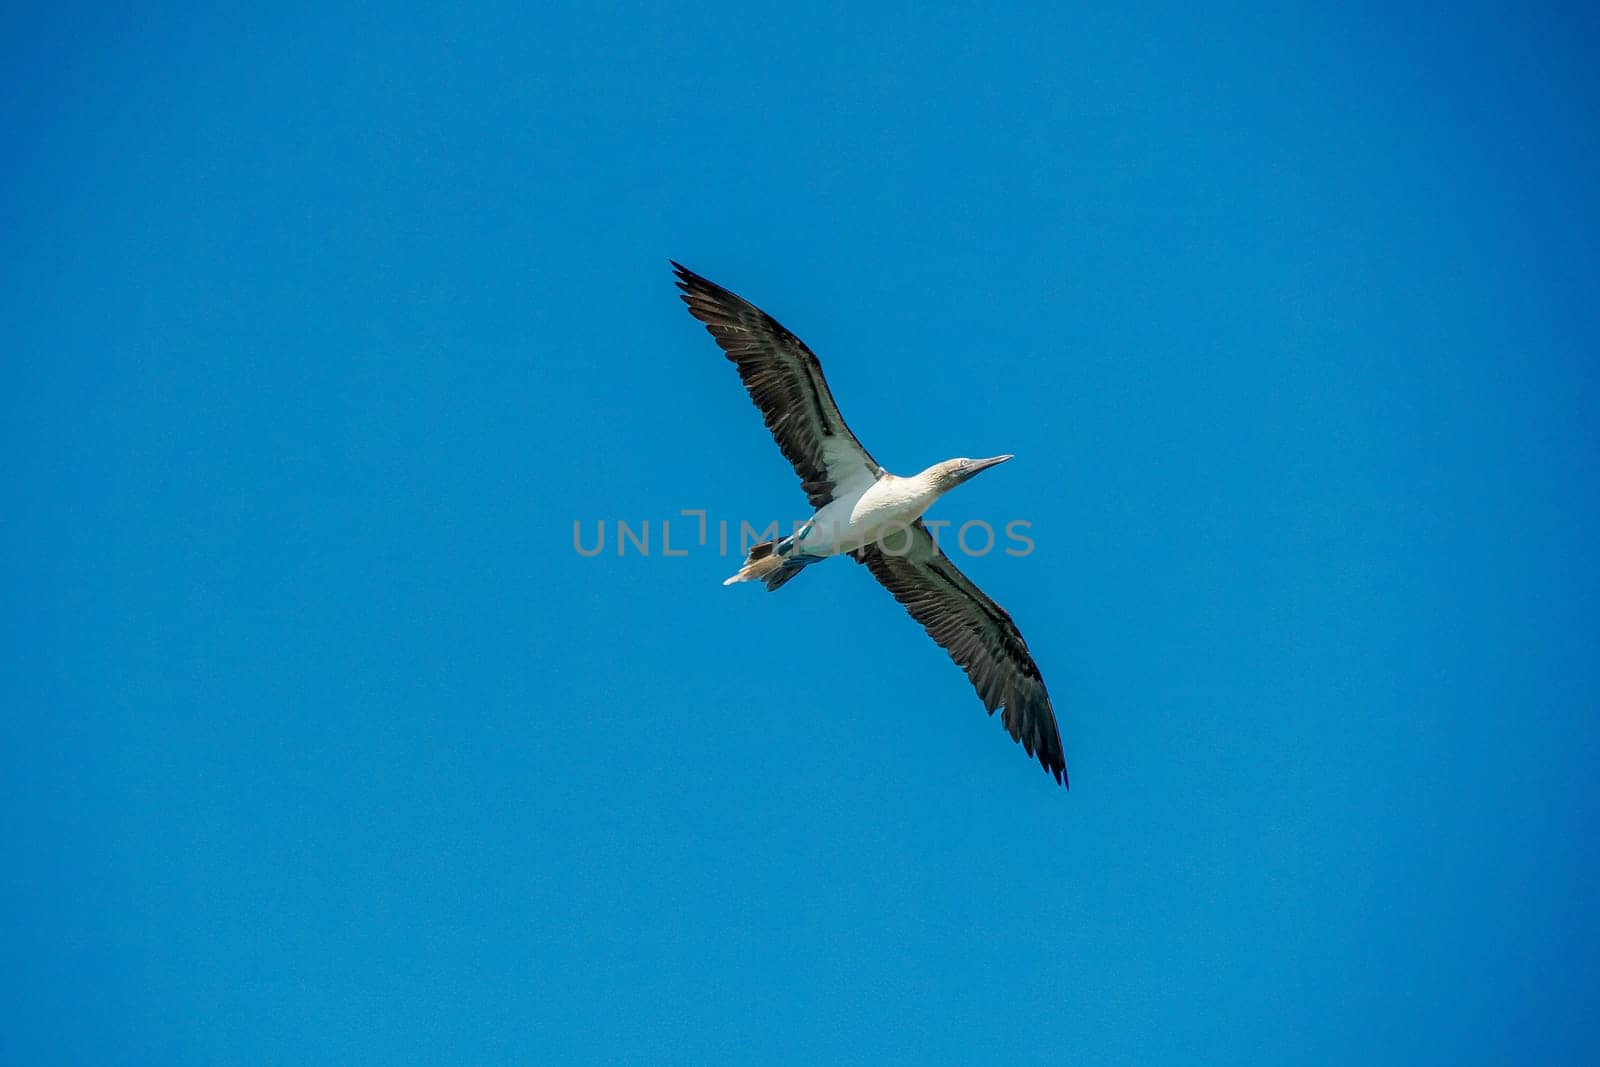 Flying Blue-footed Booby (Sula nebouxii) on rocks, coming from Galapagos Islands, Ecuador to Baja California Sur, Mexico by AndreaIzzotti